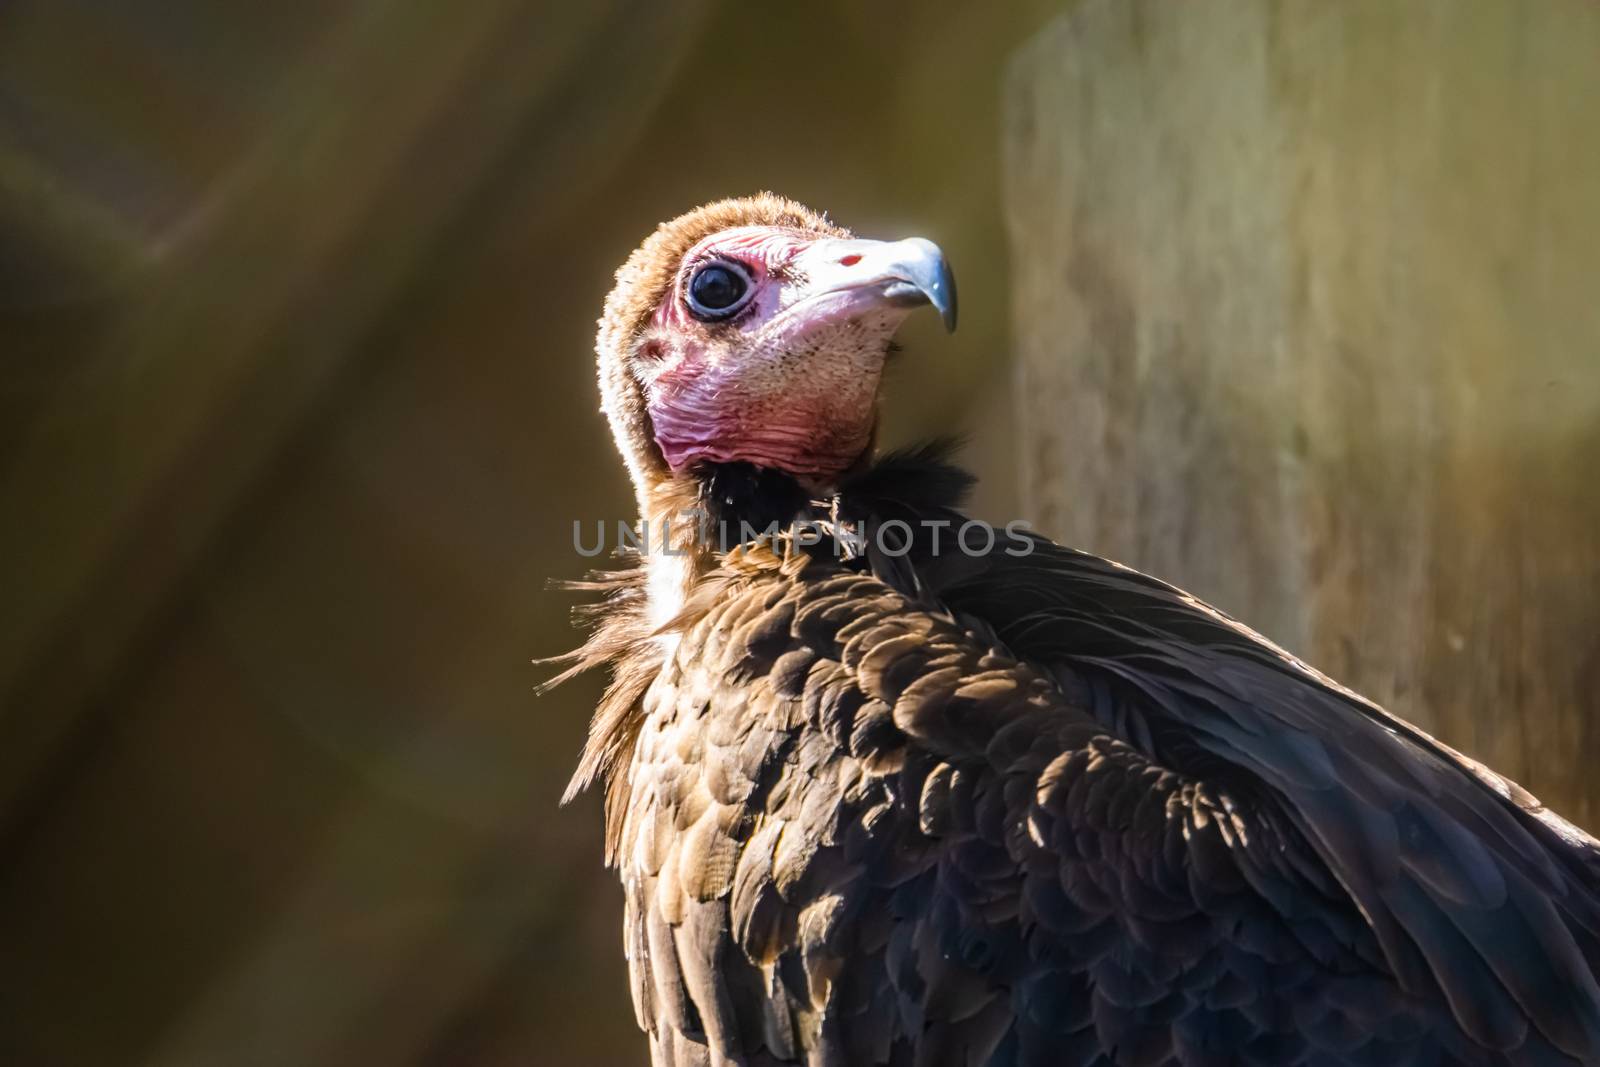 hooded vulture with its face in closeup, critically endangered scavenger bird from the desert of Africa by charlottebleijenberg